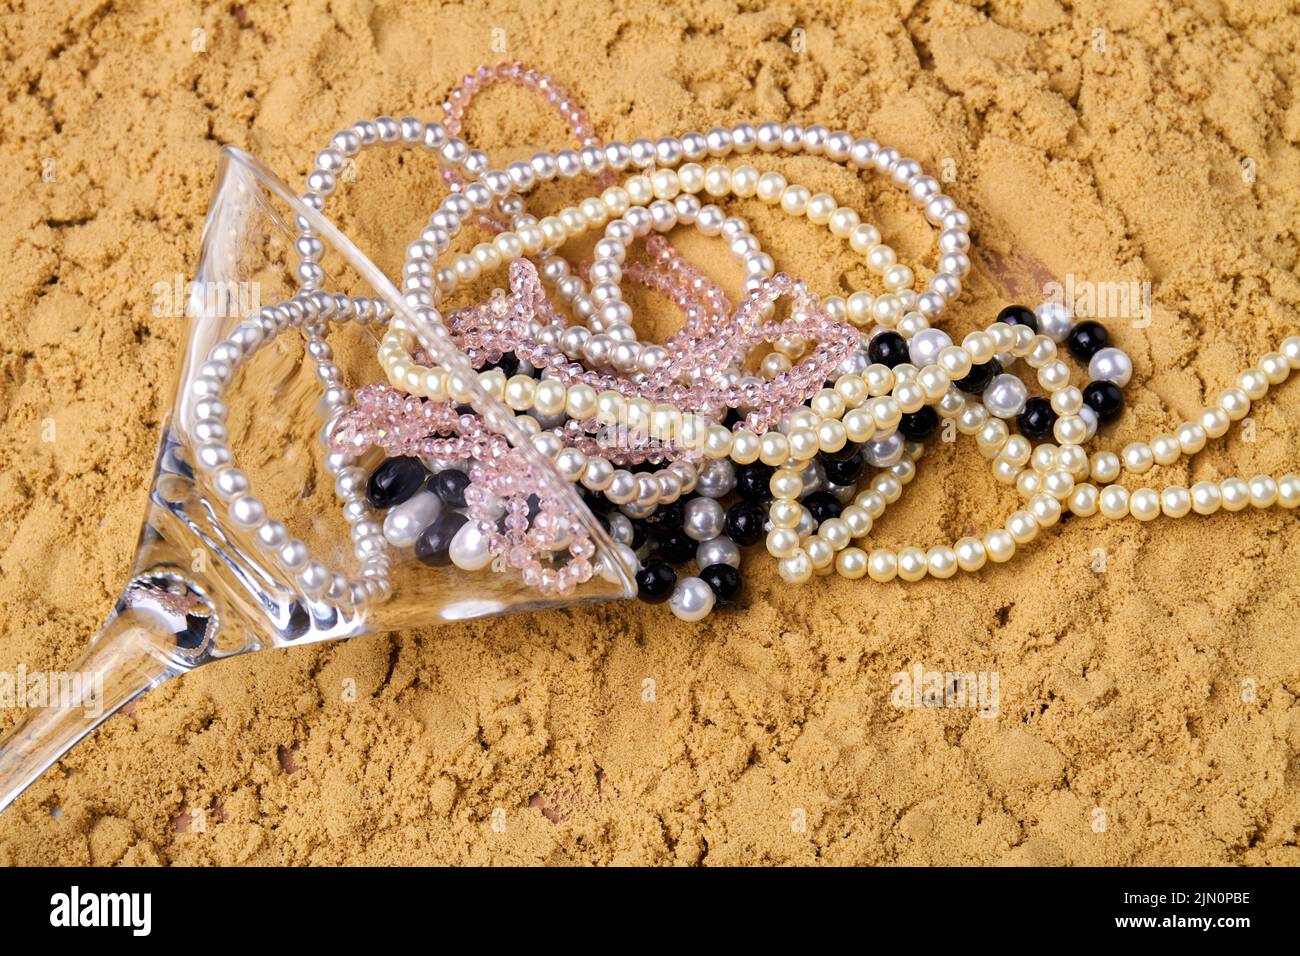 Cocktail glass with pearl necklaces on the sand. Accessories on the beach. Stock Photo